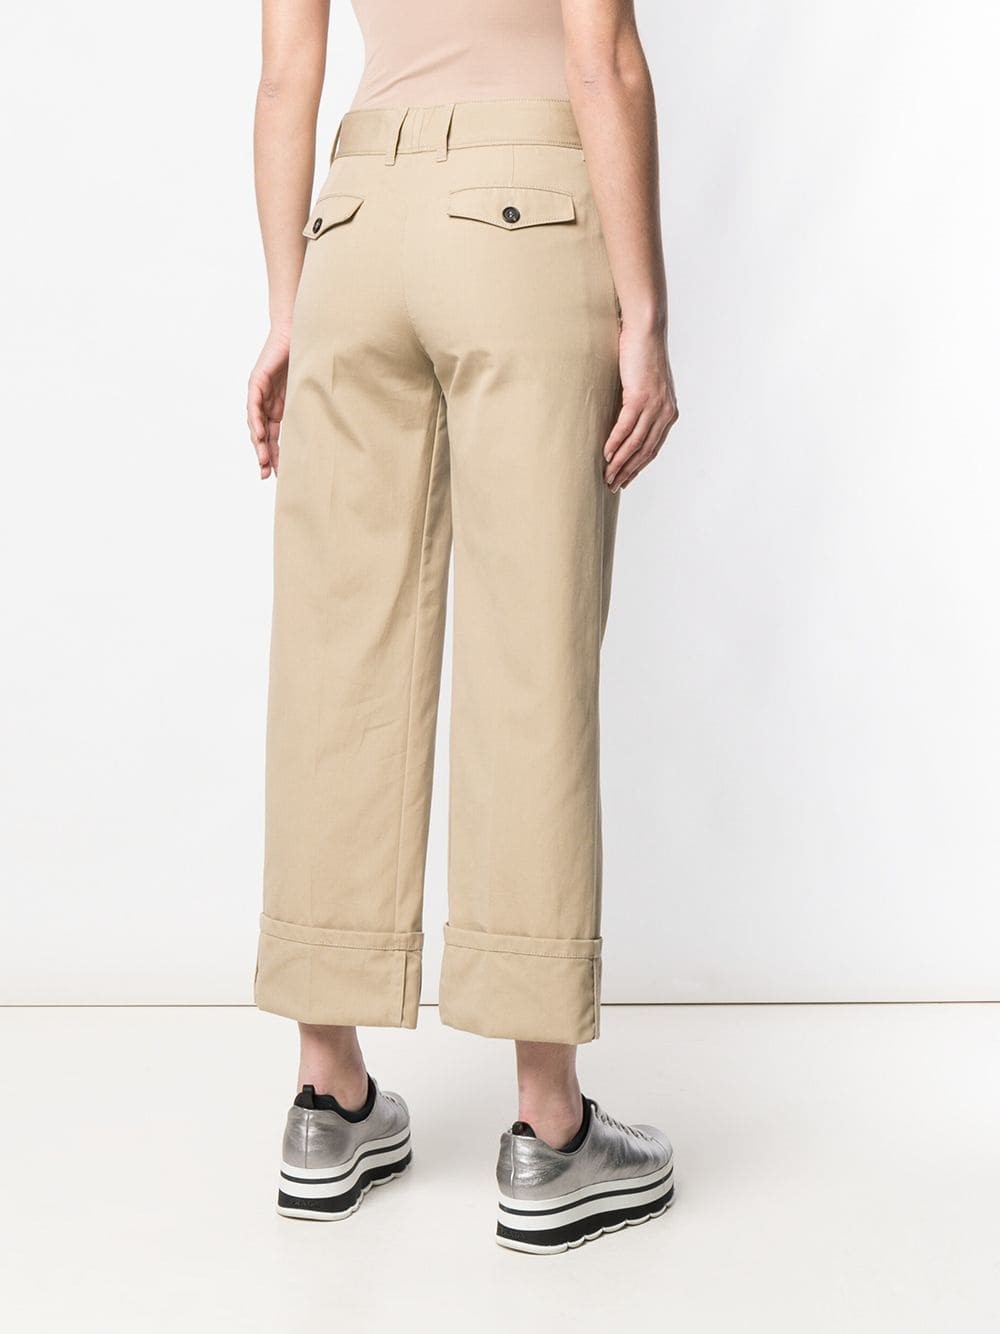 prada TROUSERS available on montiboutique.com - 26288